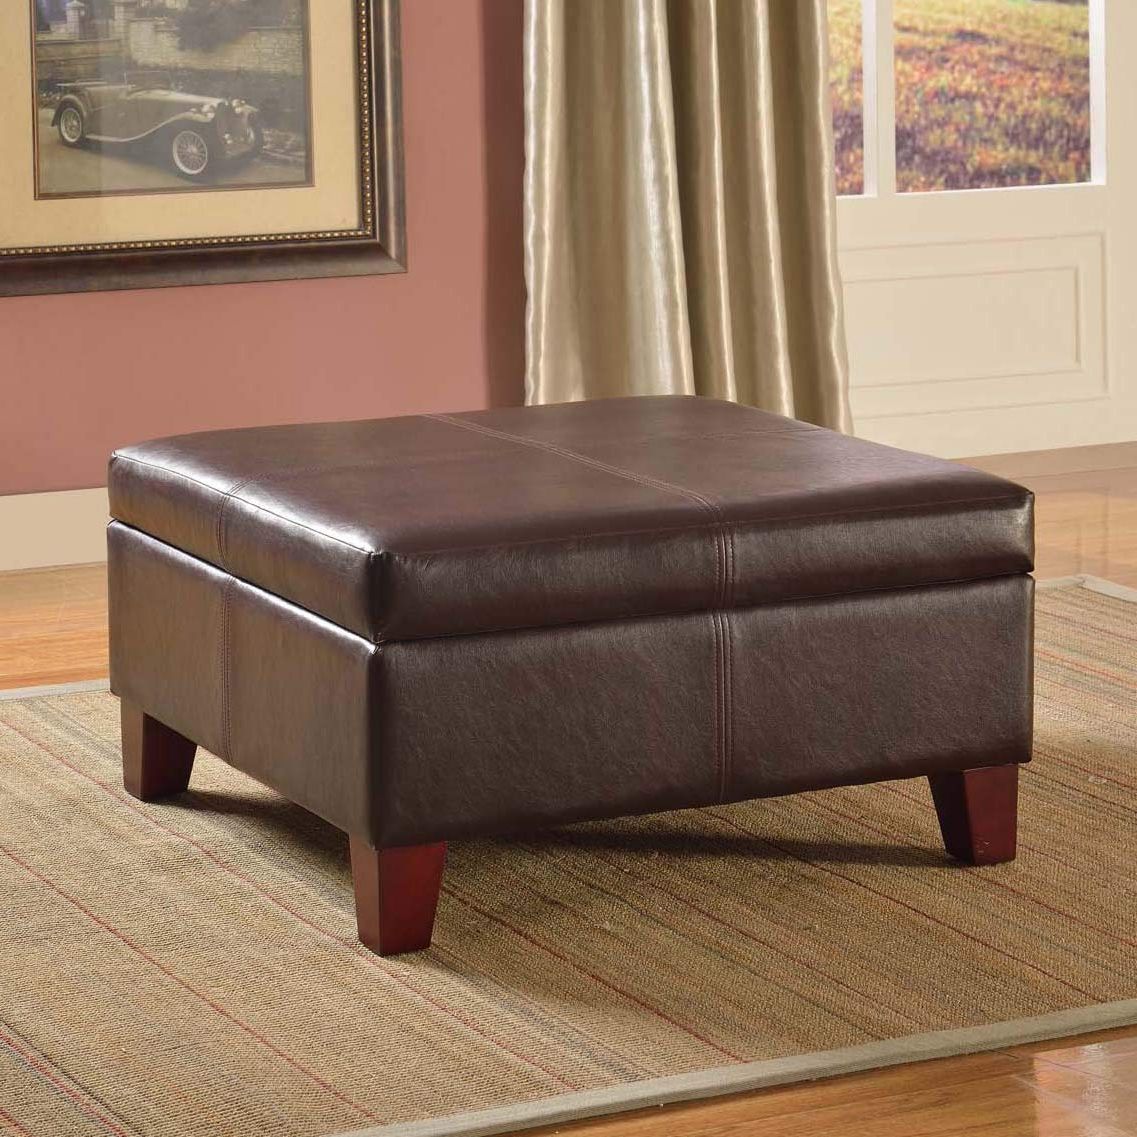 Recent Weathered Gold Leather Hide Pouf Ottomans Within Homepop K2380 E155 Bonded Leather Square Storage Ottoman Coffee Table (View 10 of 10)